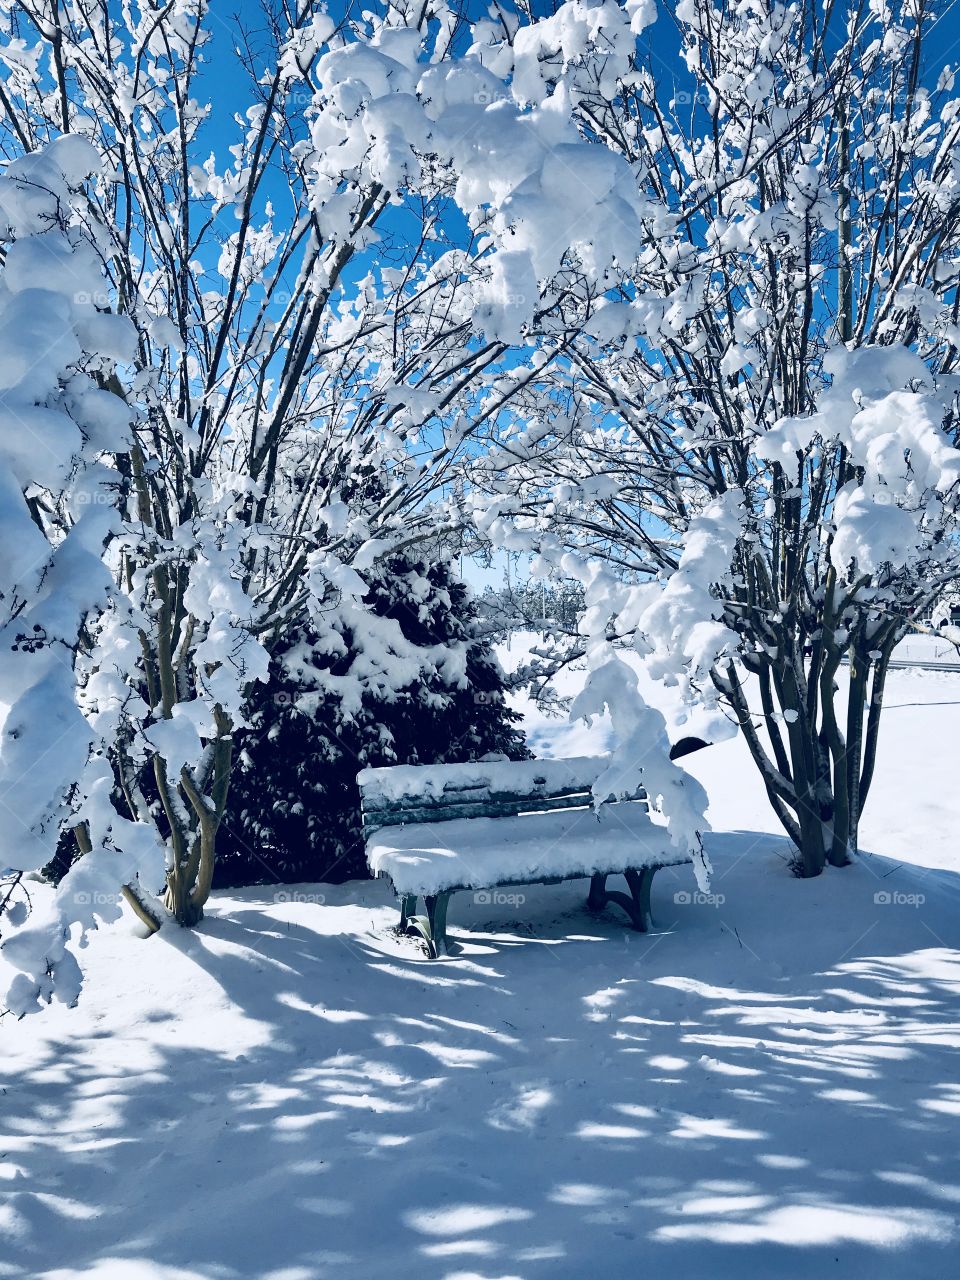 Snow Covered Bench 2018NC